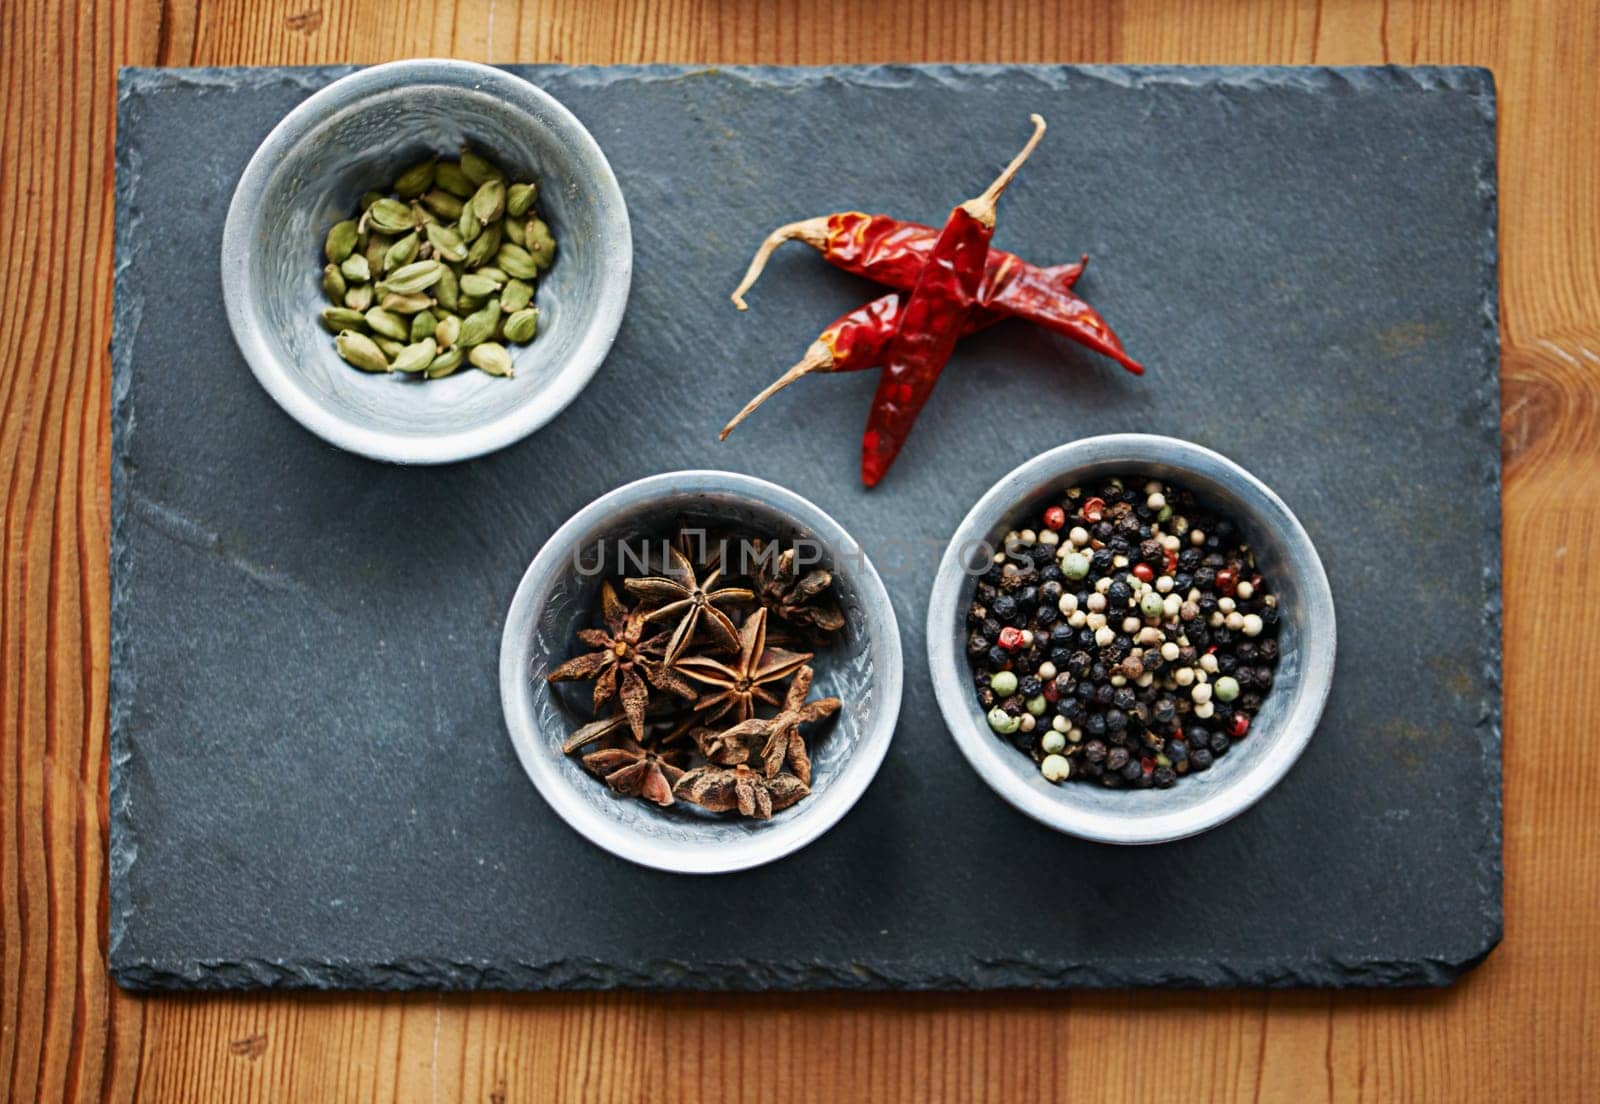 Chilli, ingredients and spices in bowl above on board for cooking for cuisine, meal and lunch. Condiments, seasoning and dried pepper for gourmet dinner with cardamon seeds, star anise and peppercorn.